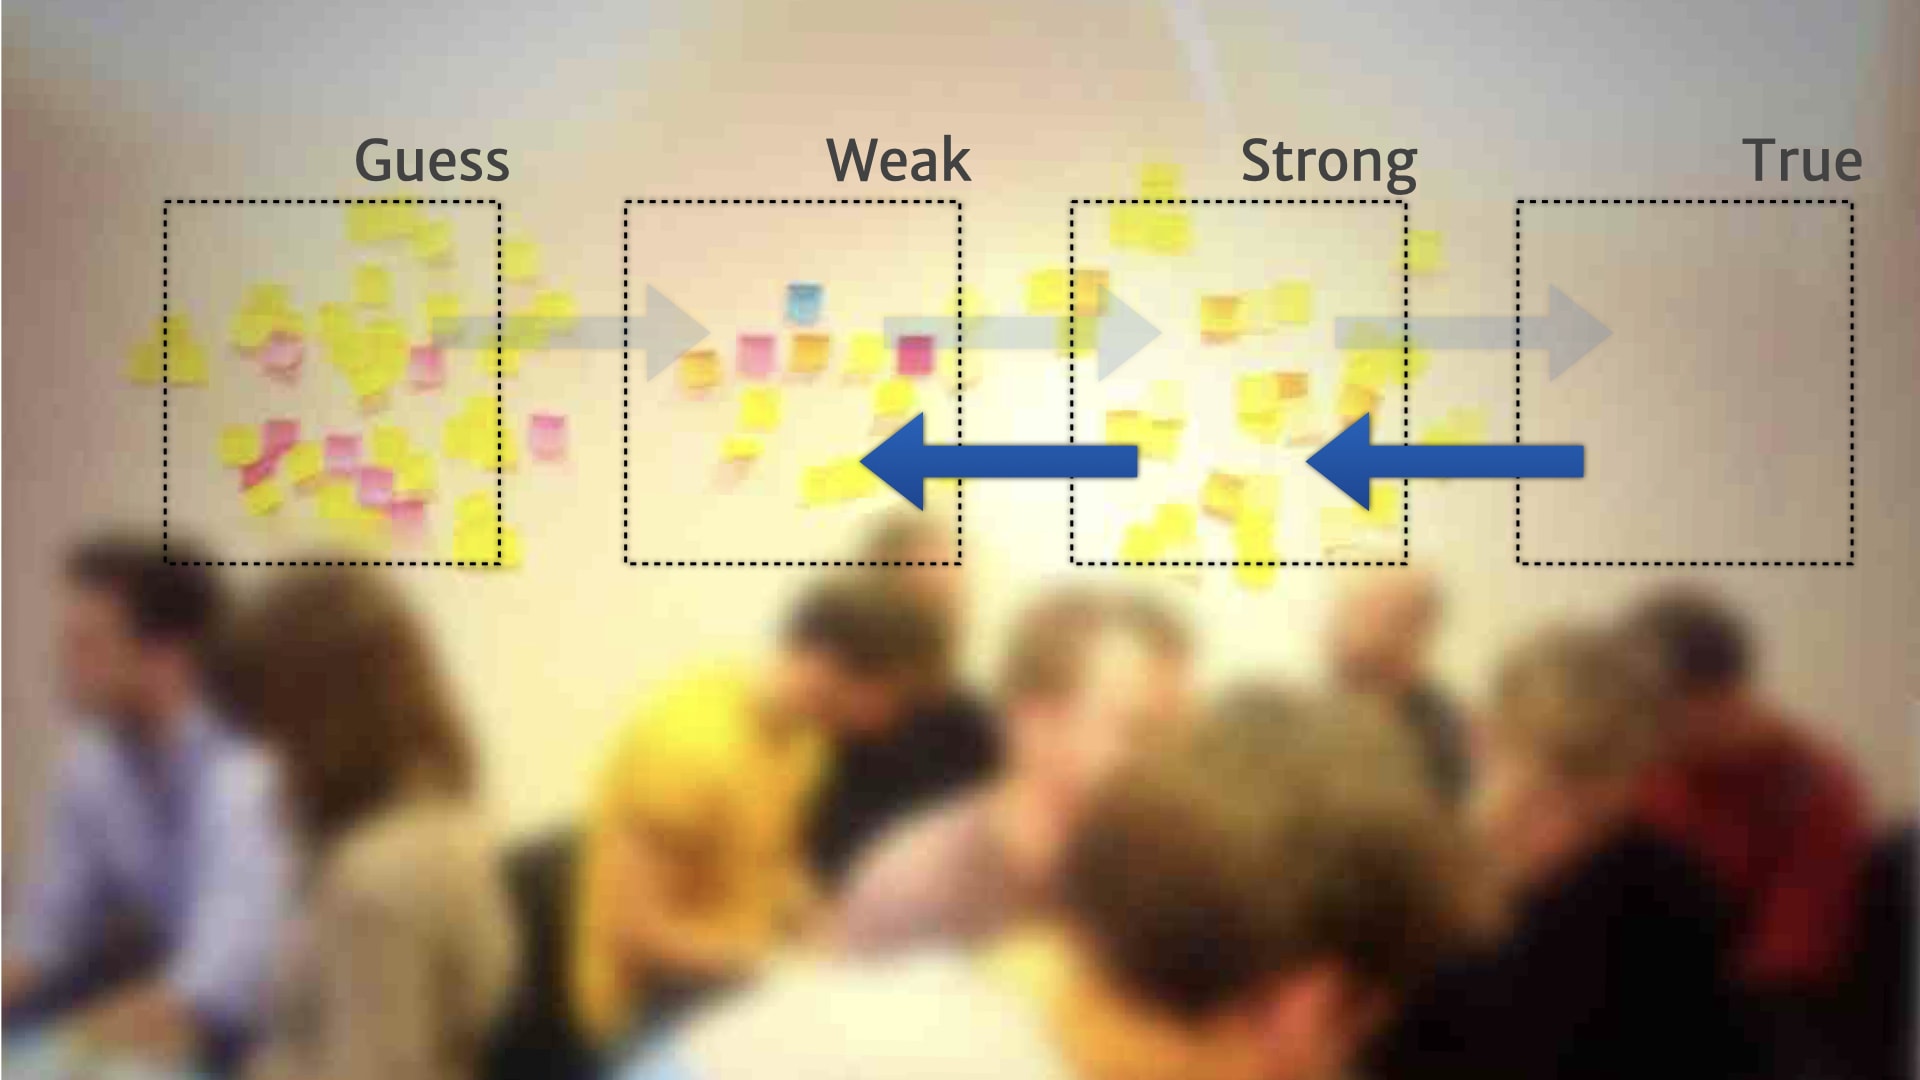 A picture of a wall of post-it notes divided into four categories running left to right (Guess, Weak, Strong, and True). Blue arrows running right-to-left illustrates a transition back from True to Strong, and from Strong to weak.